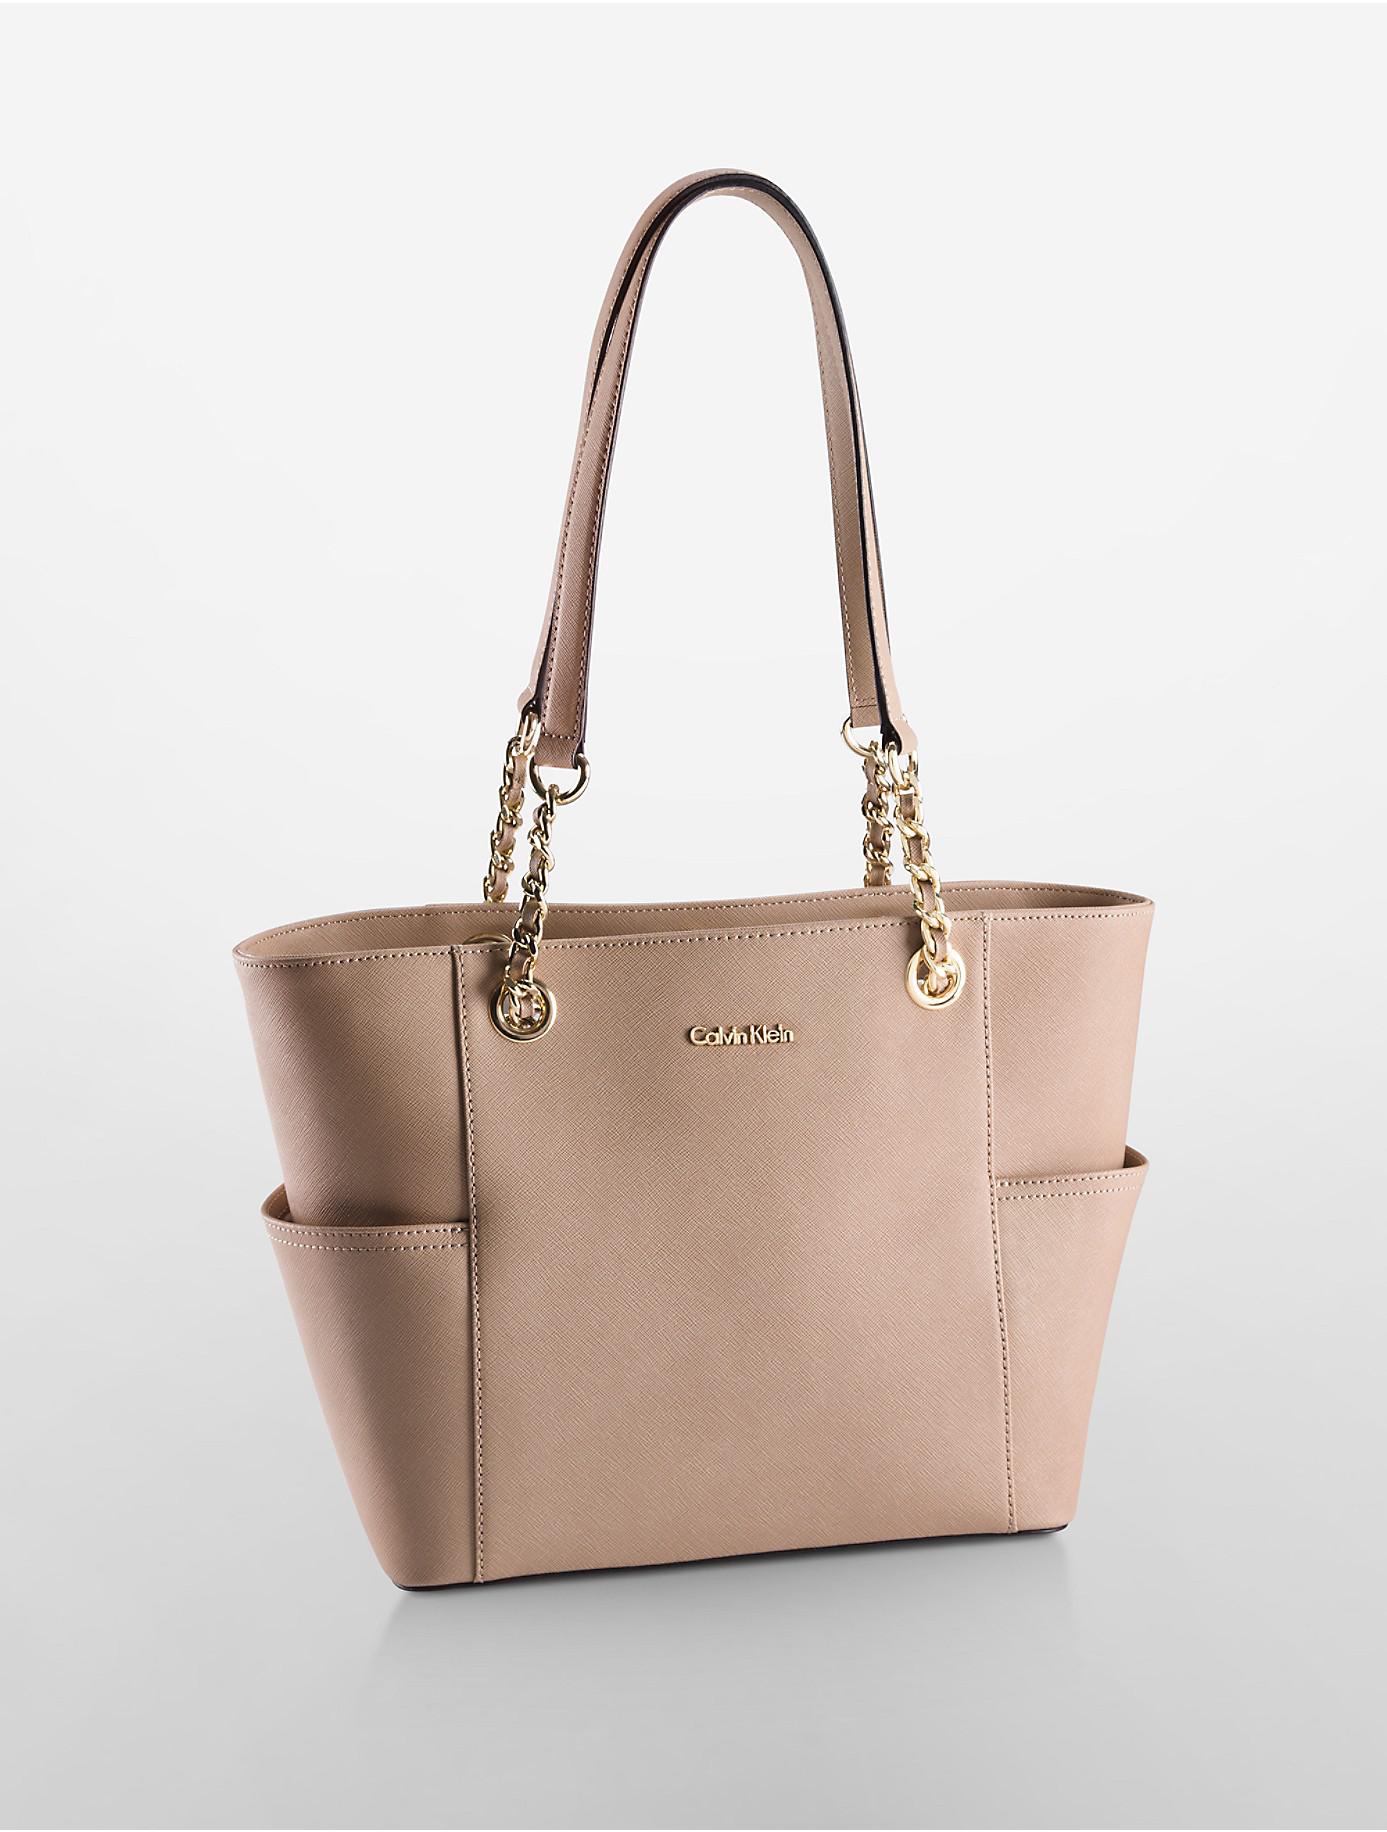 Calvin Klein Saffiano Leather Chain-trimmed Tote Bag in Nude (Brown) - Lyst